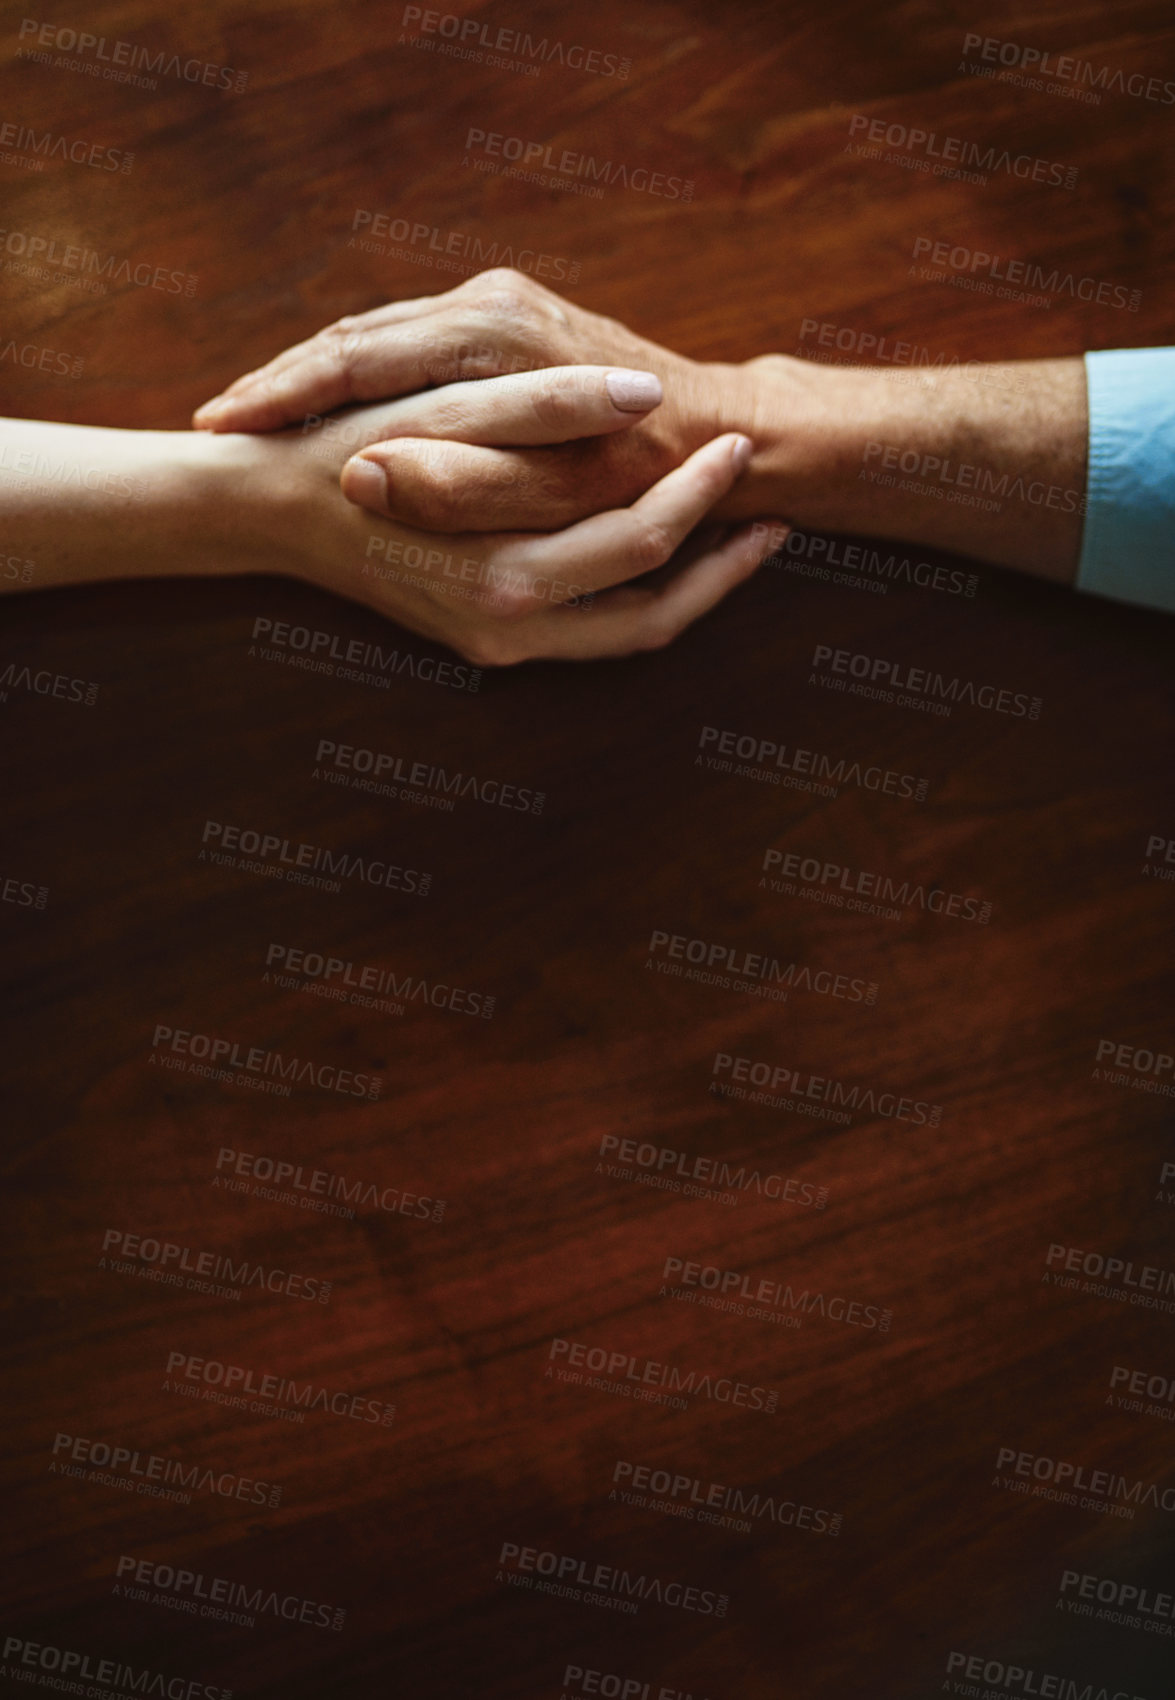 Buy stock photo Closeup shot of two unidentifiable people holding hands in comfort